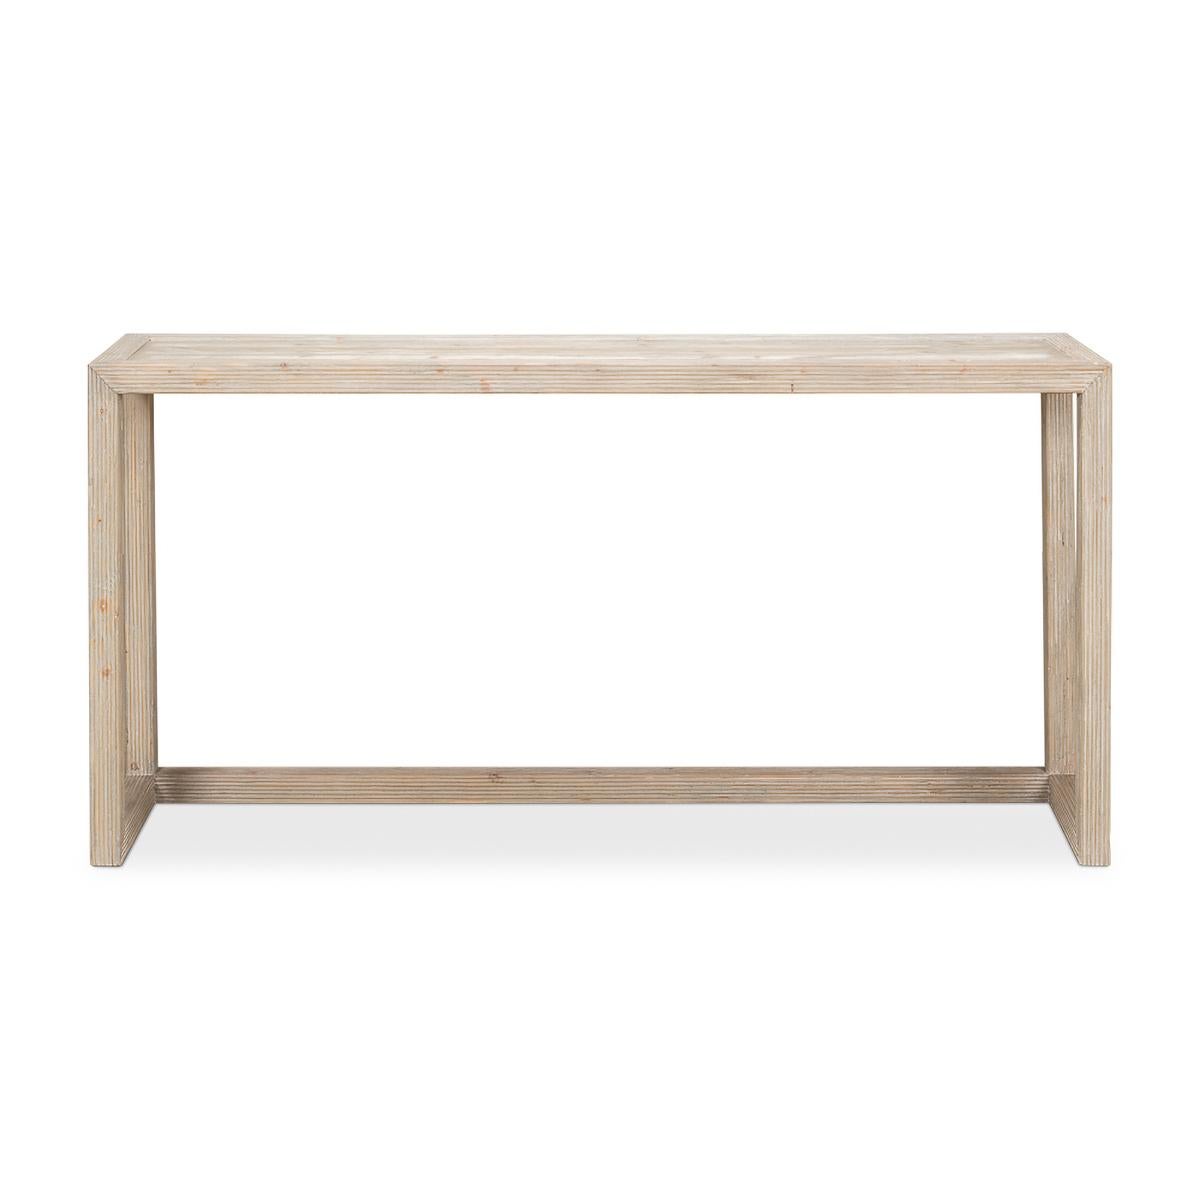 An Organic Modern pine console table with a pickled finish, a reeded framed edge, and a stretcher base.

Dimensions: 66